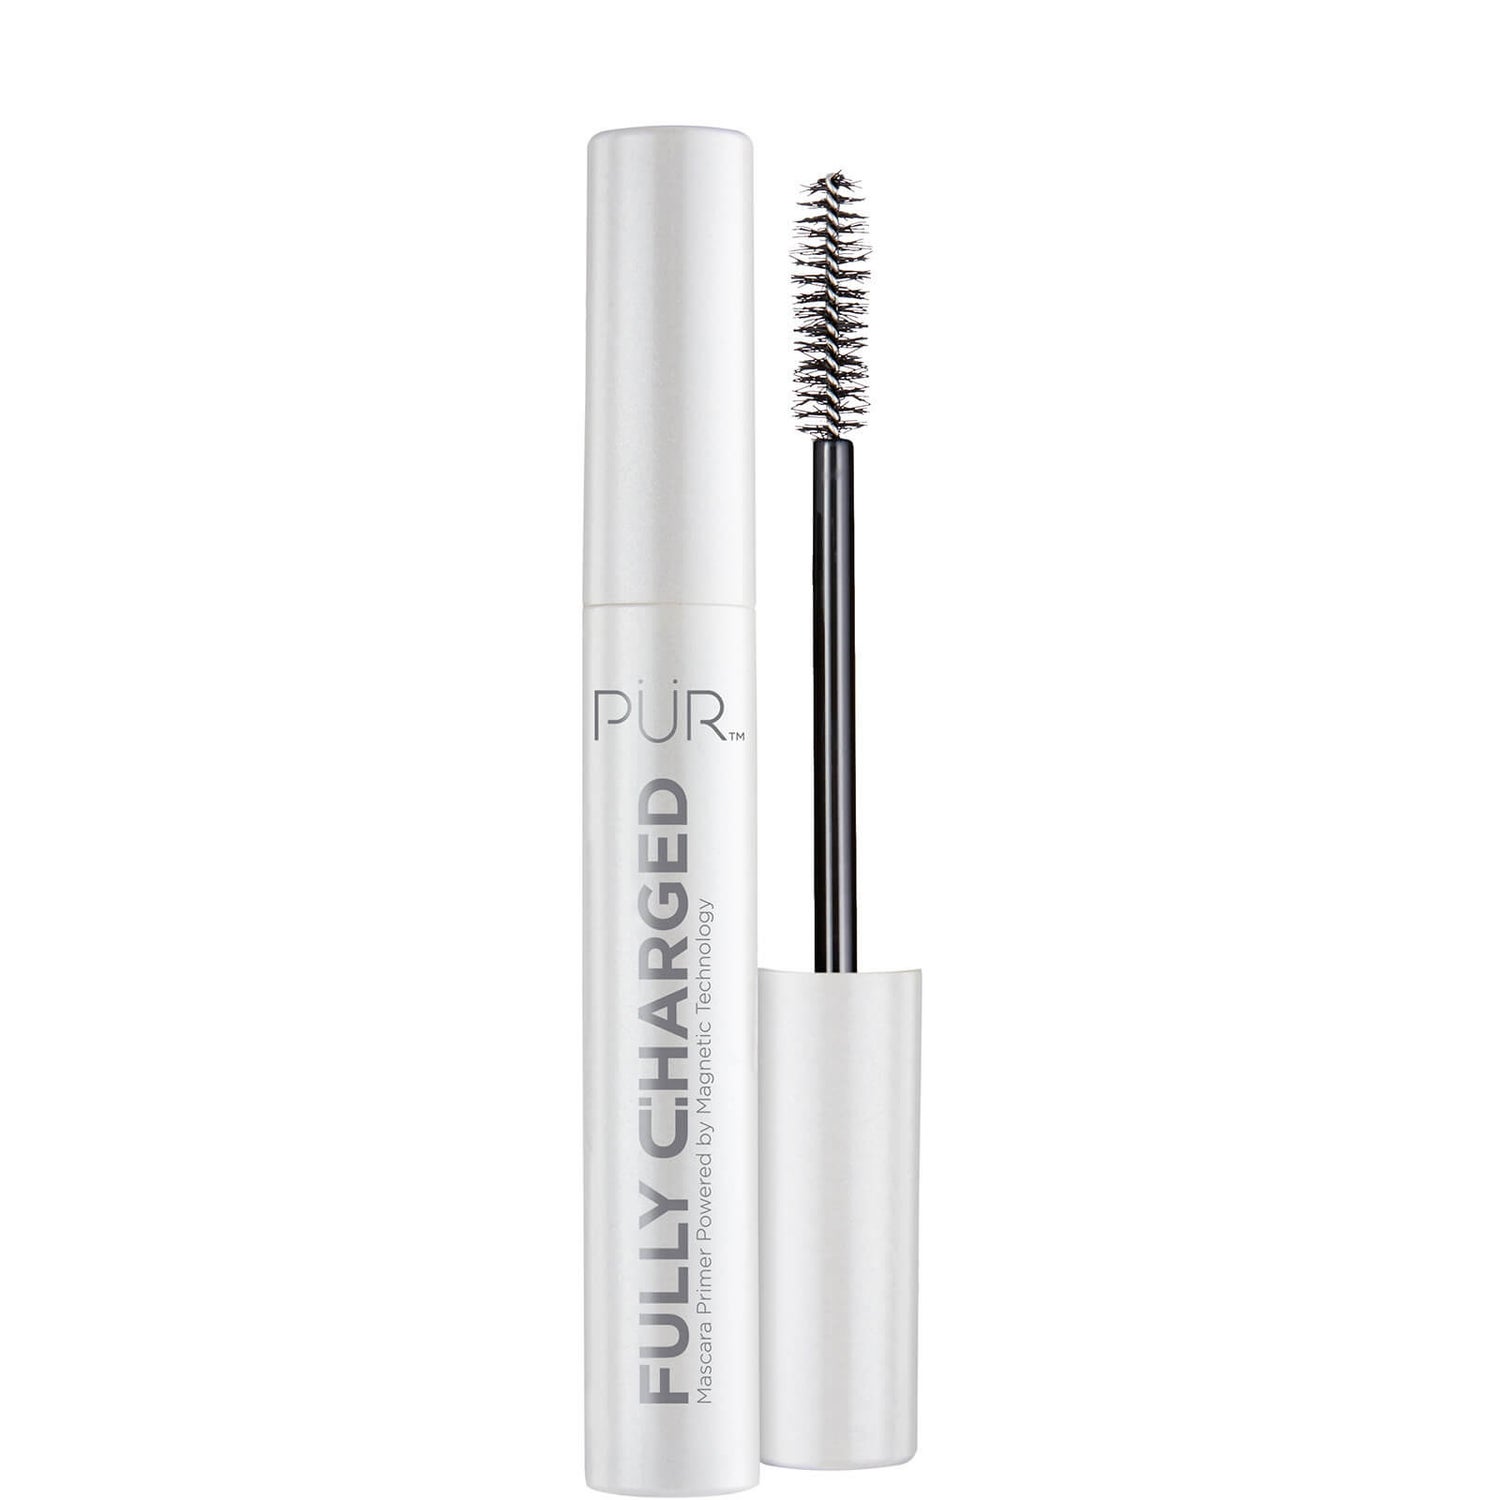 PÜR Fully Charged Mascara Primer Powdered by Magnetic Technology 12ml